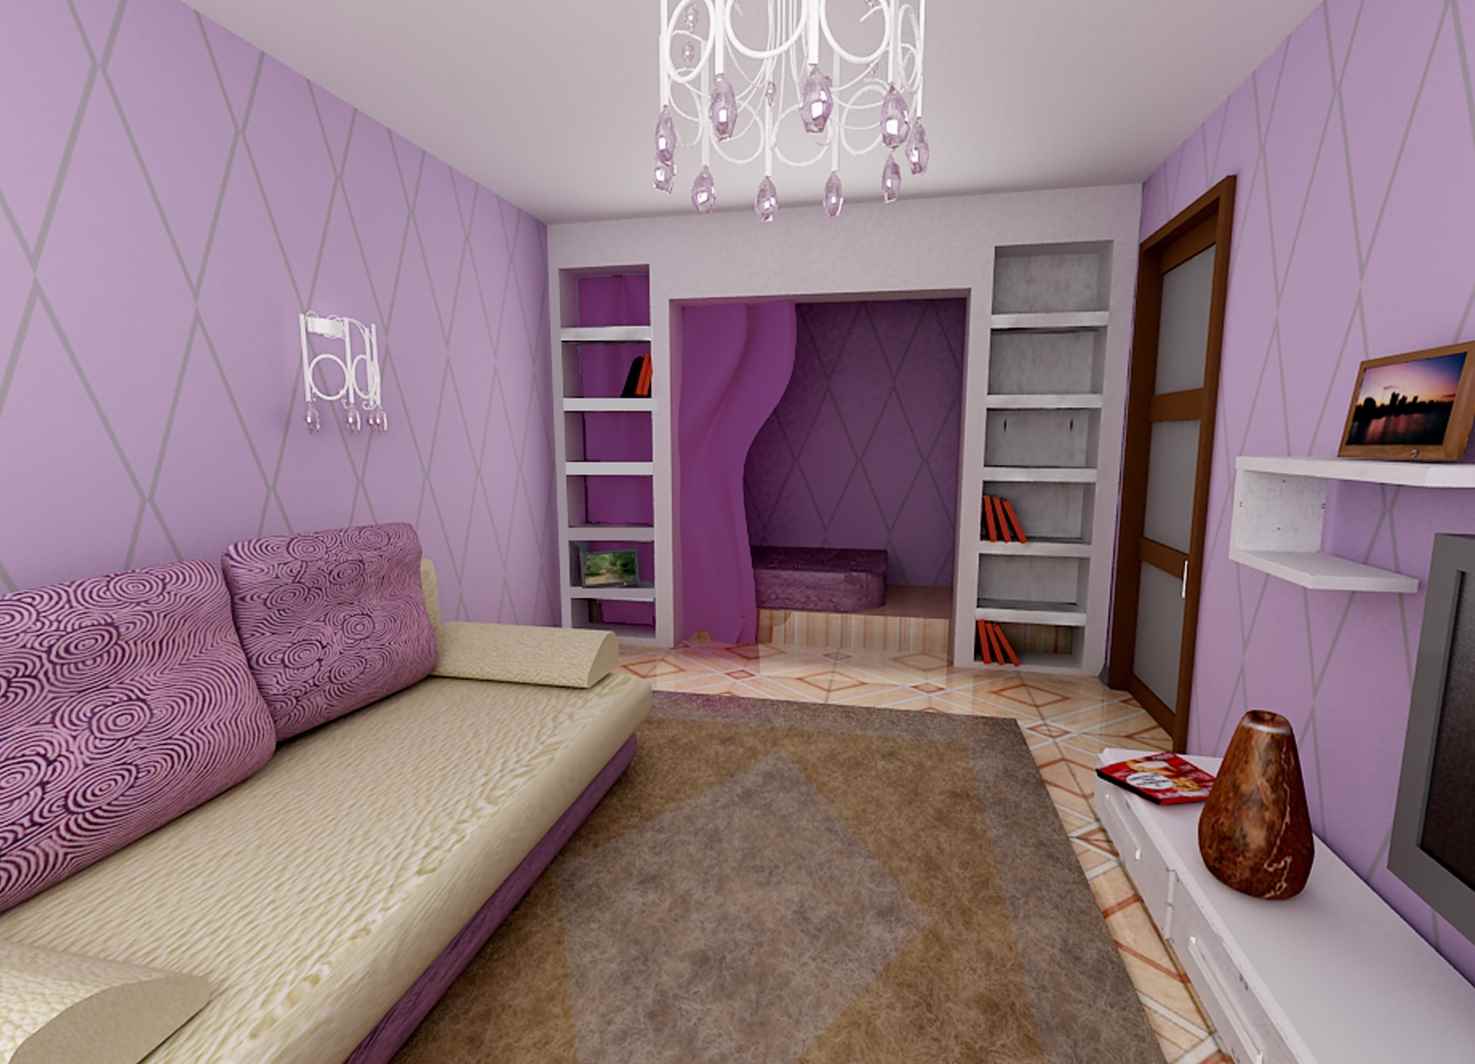 application of light lilac in the interior